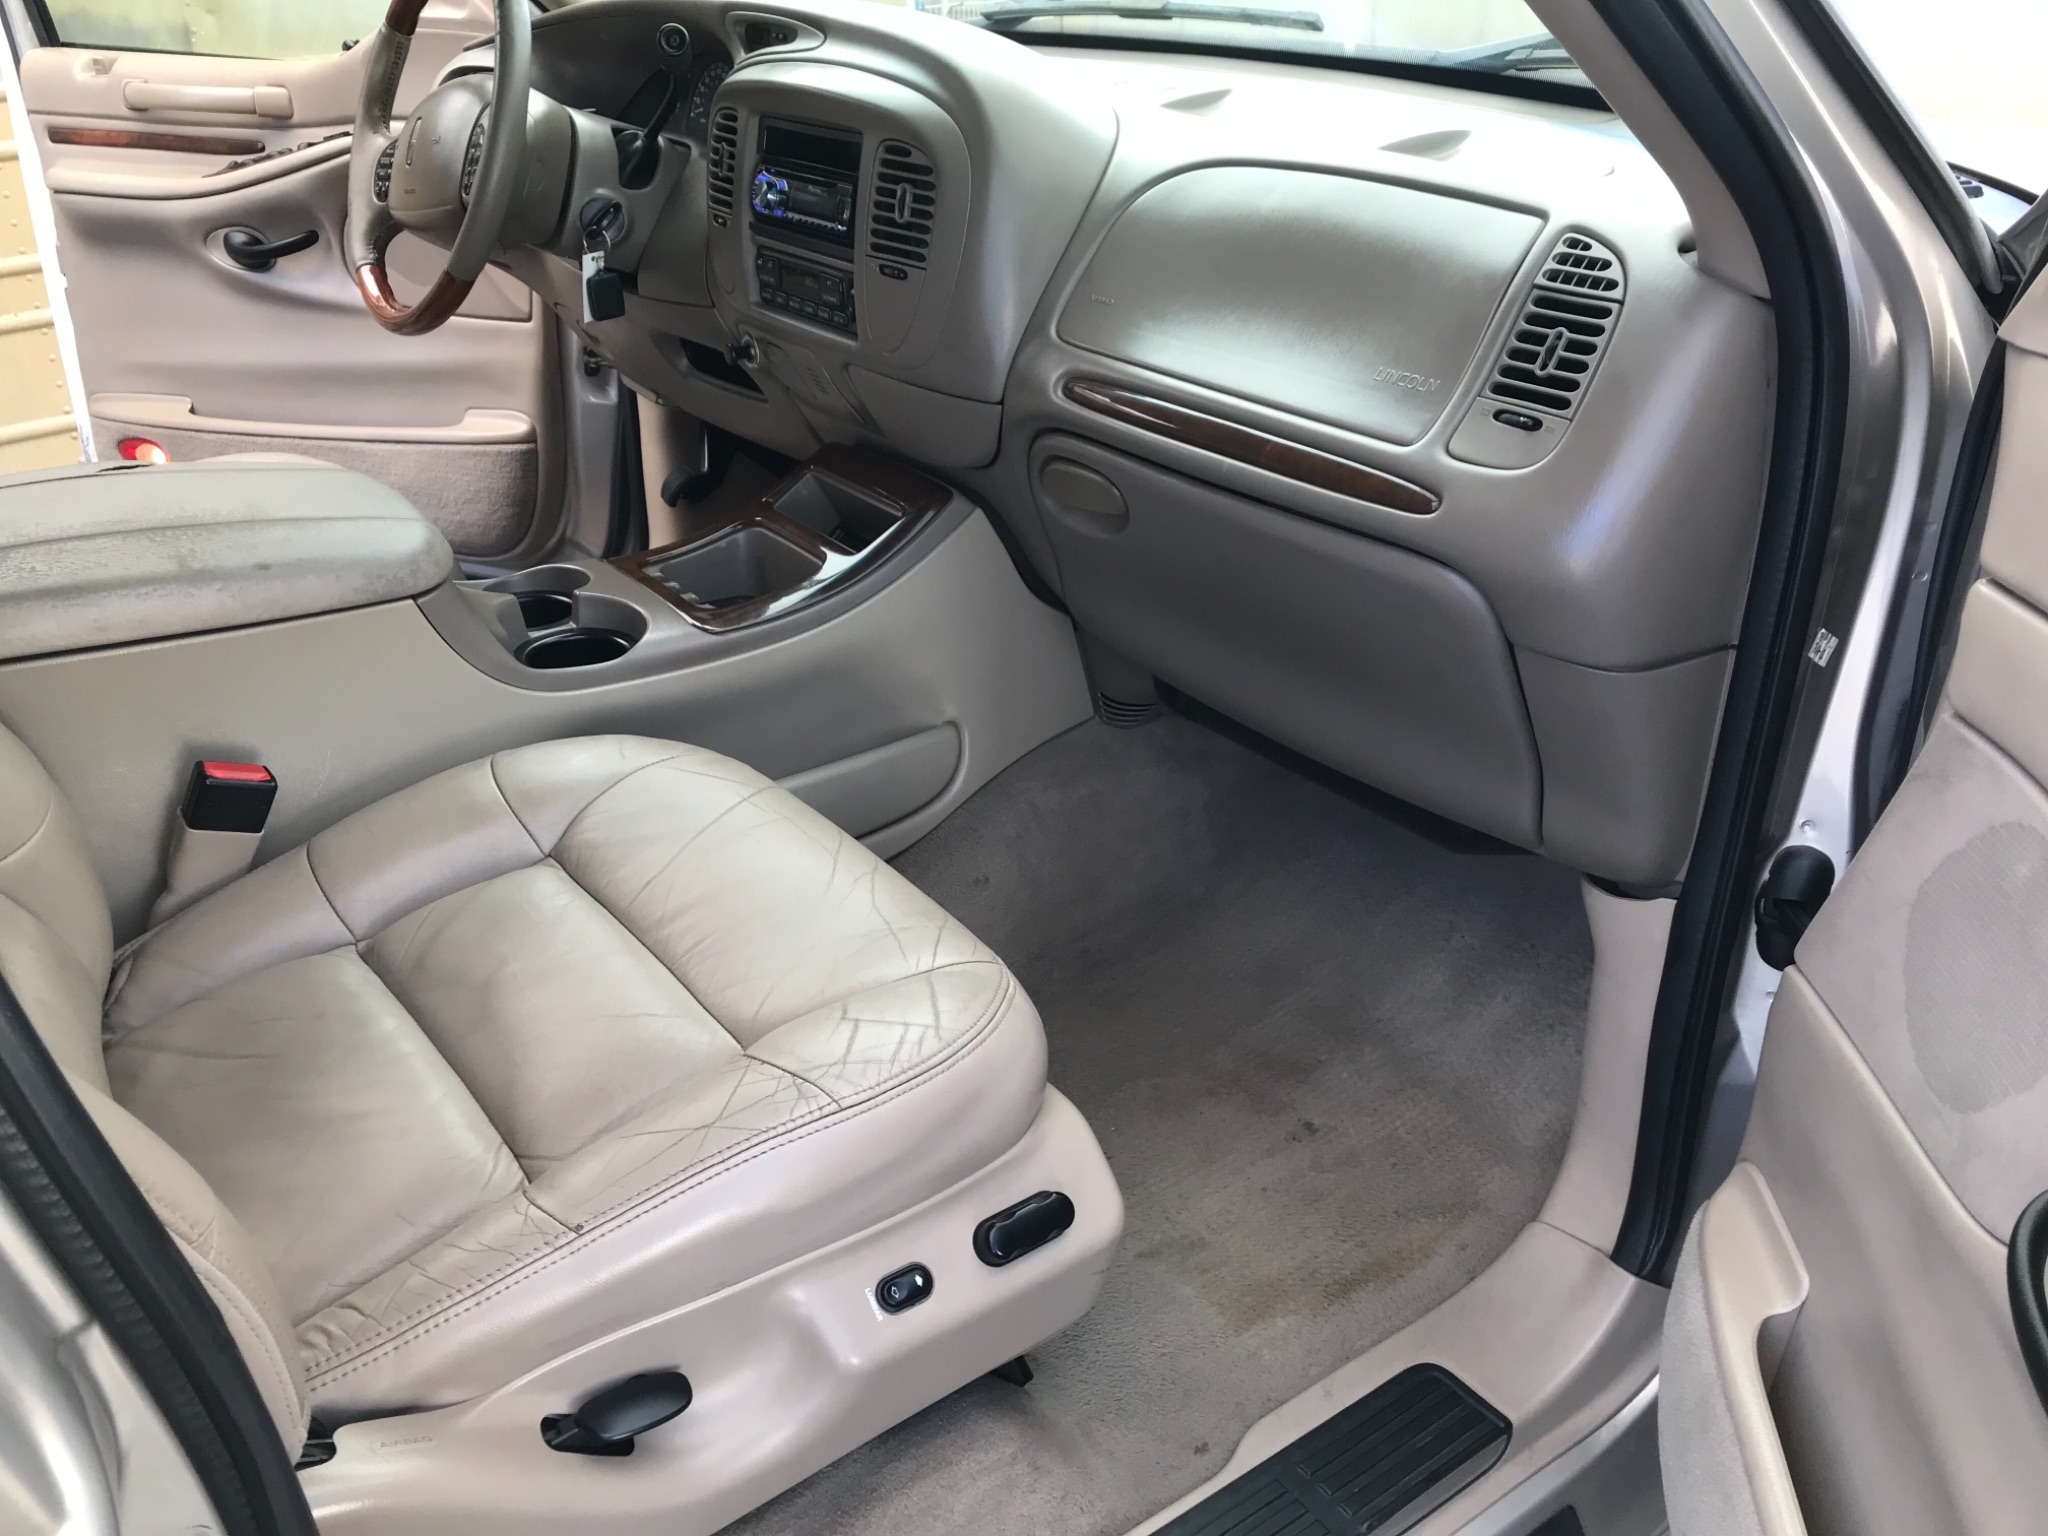 Used 2002 Lincoln Navigator Eddie bauer at City Cars Warehouse Inc